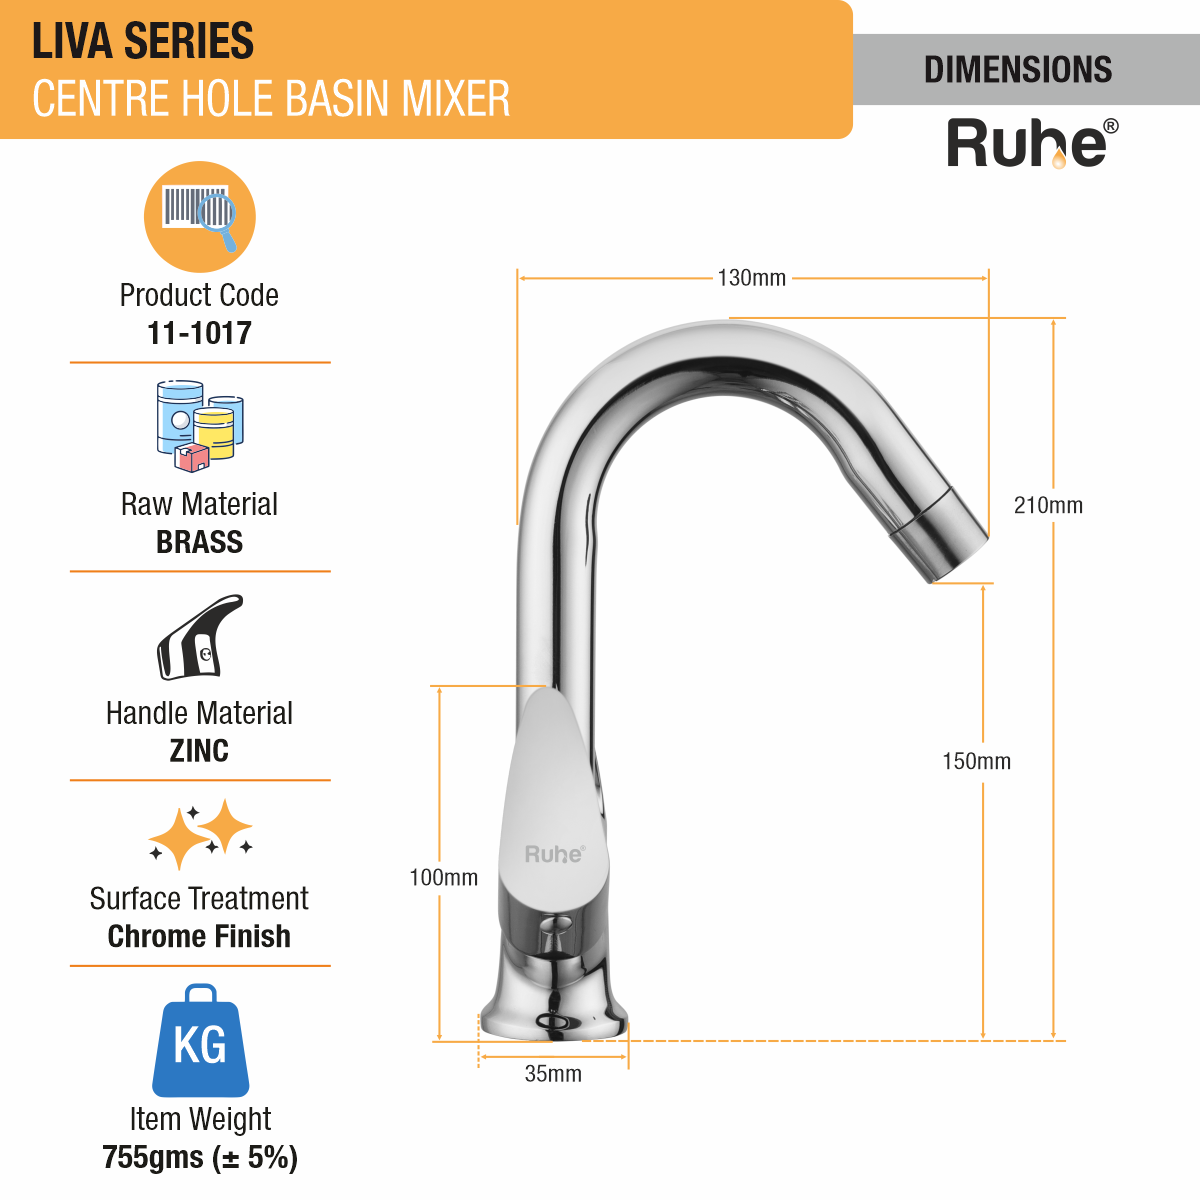 Liva Centre Hole Basin Mixer with Small (12 inches) Round Swivel Spout Faucet dimensions and size